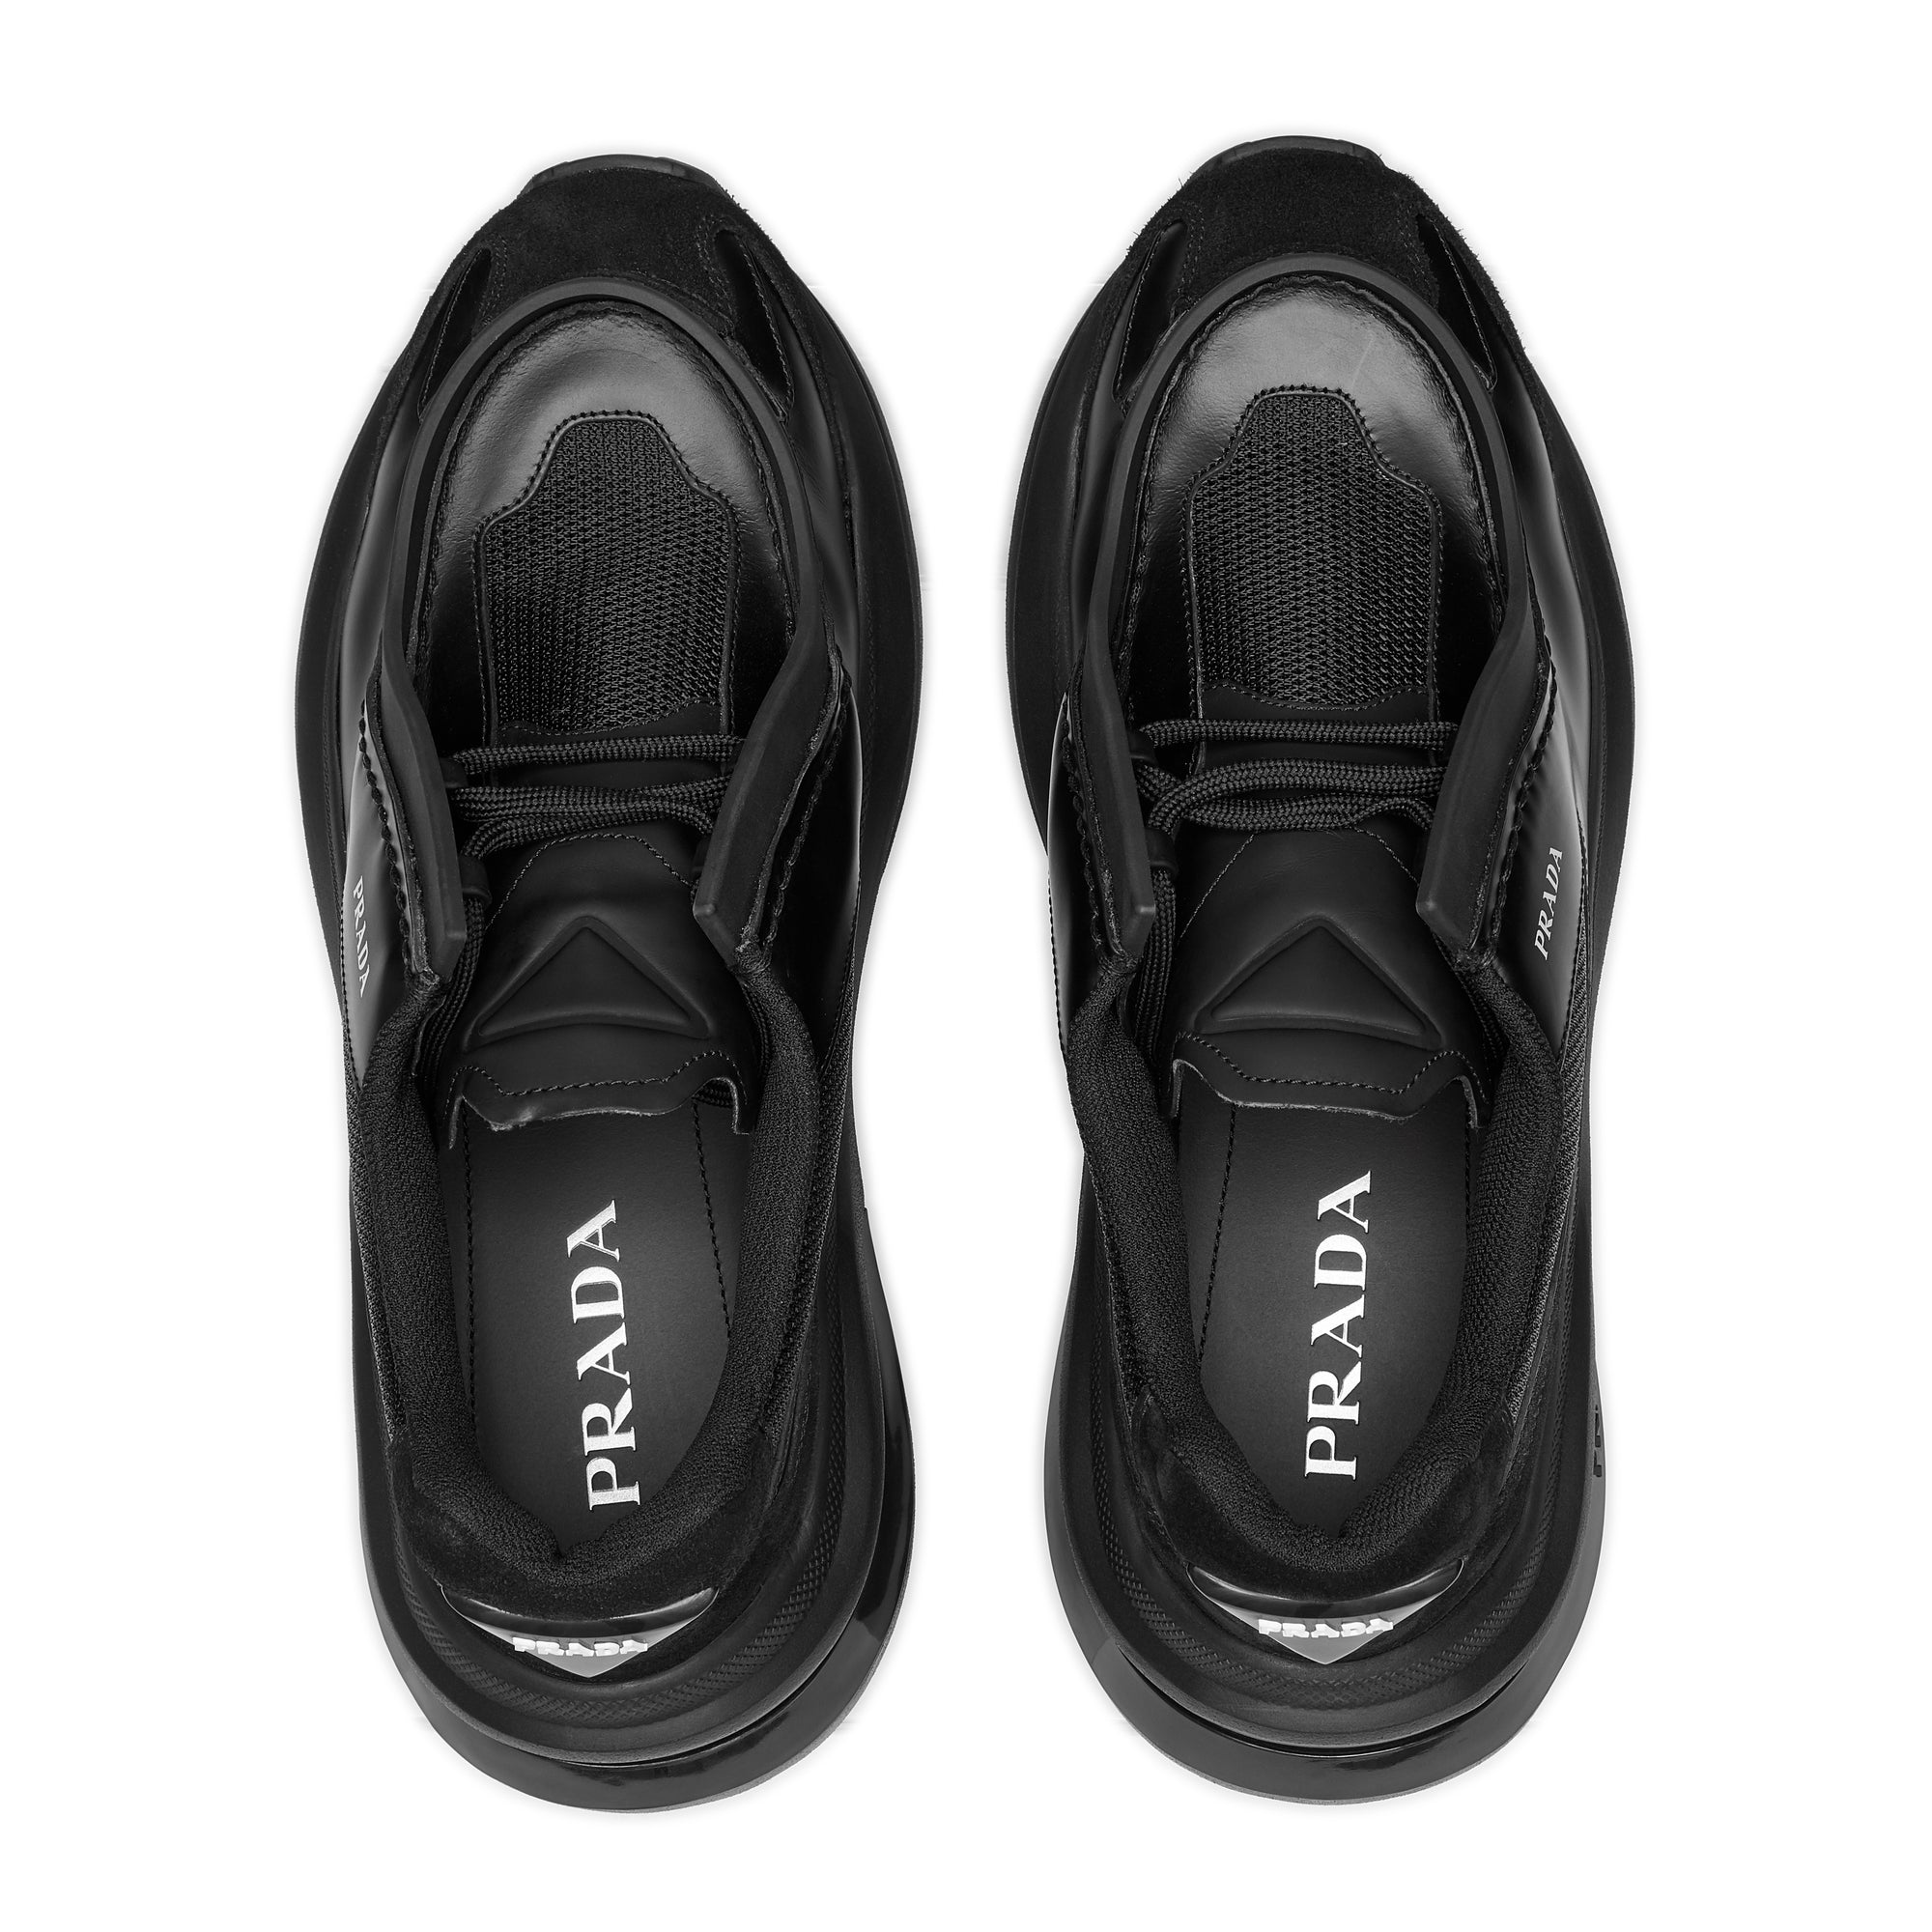 Prada - Men's Systeme Brushed Leather Sneakers - (Nero) view 6